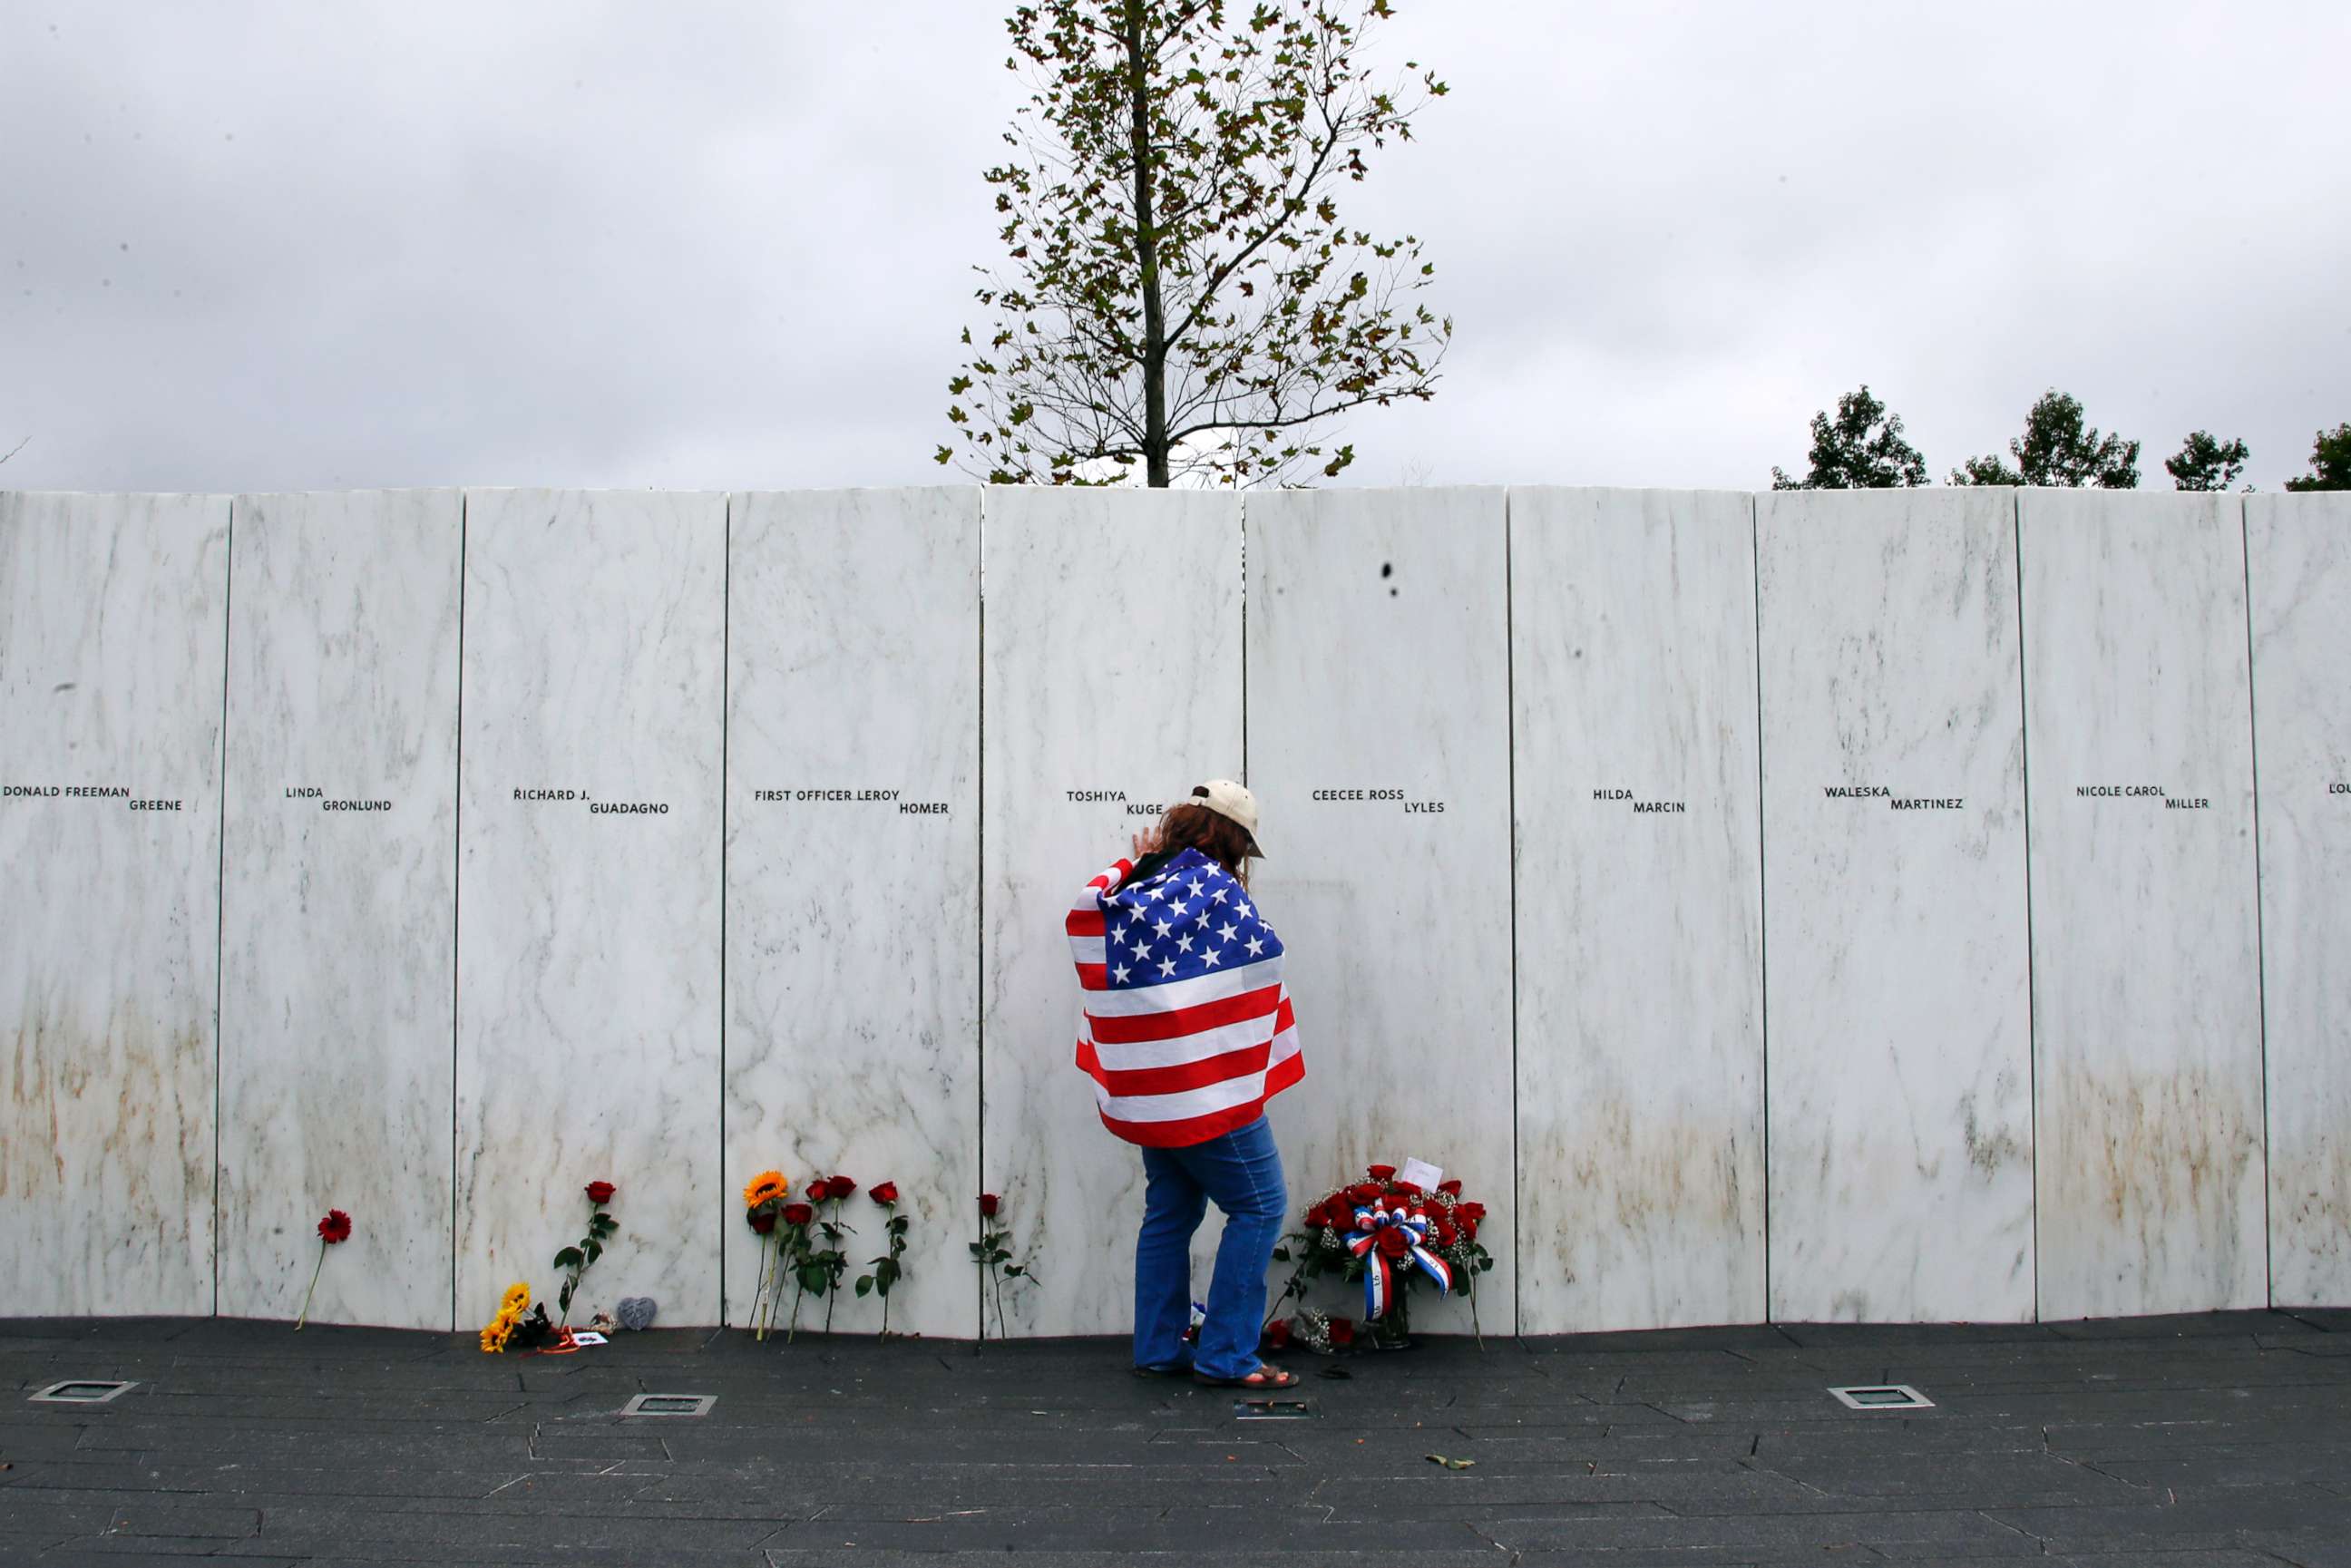 PHOTO: Chrissy Bortz of Latrobe, Pa., pays her respects at the Wall of Names at the Flight 93 National Memorial in Shanksville, Pa. after a Service of Remembrance, Sept. 11, 2018, as the nation marks the 17th anniversary of the Sept. 11, 2001 attacks.